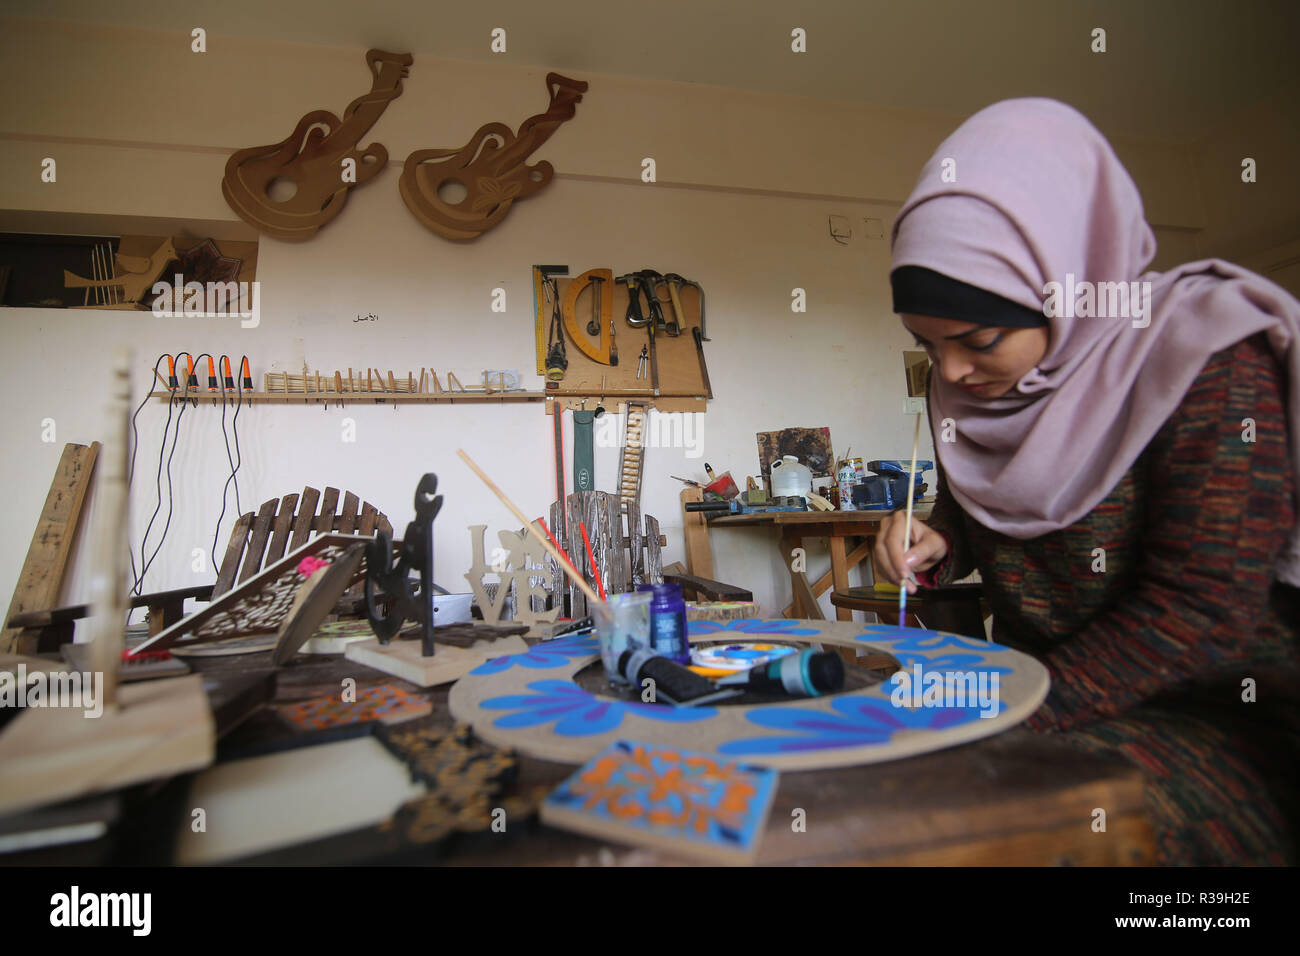 Gaza. 22nd Nov, 2018. Palestinian artist Walaa Abu al-Aish works at her workshop inside her house, in the southern Gaza Strip city of Rafah, on Nov. 22, 2018. The 22-year-old Walaa makes a living by creating art pieces out of wood and selling them through social media on Internet. Credit: Khaled Omar/Xinhua/Alamy Live News Stock Photo